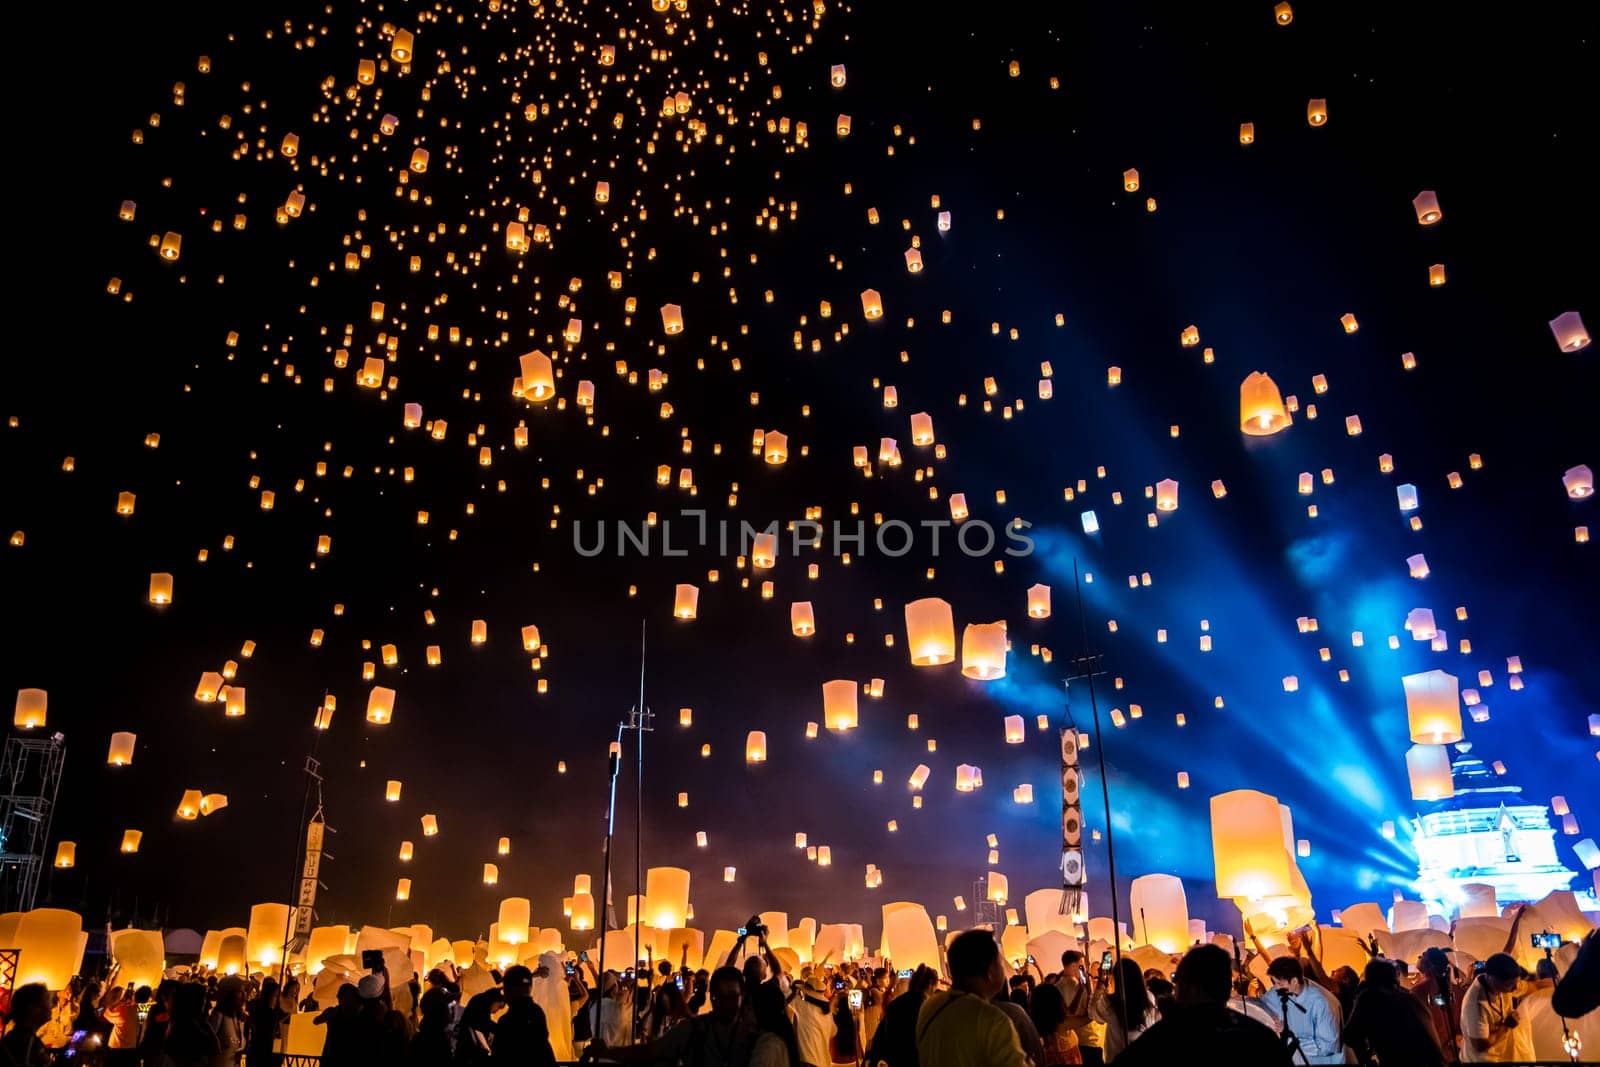 Sky lantern mass release event for Yee Peng and Loy Krathong traditional festival in Chiang Mai, Thailand by worldpitou